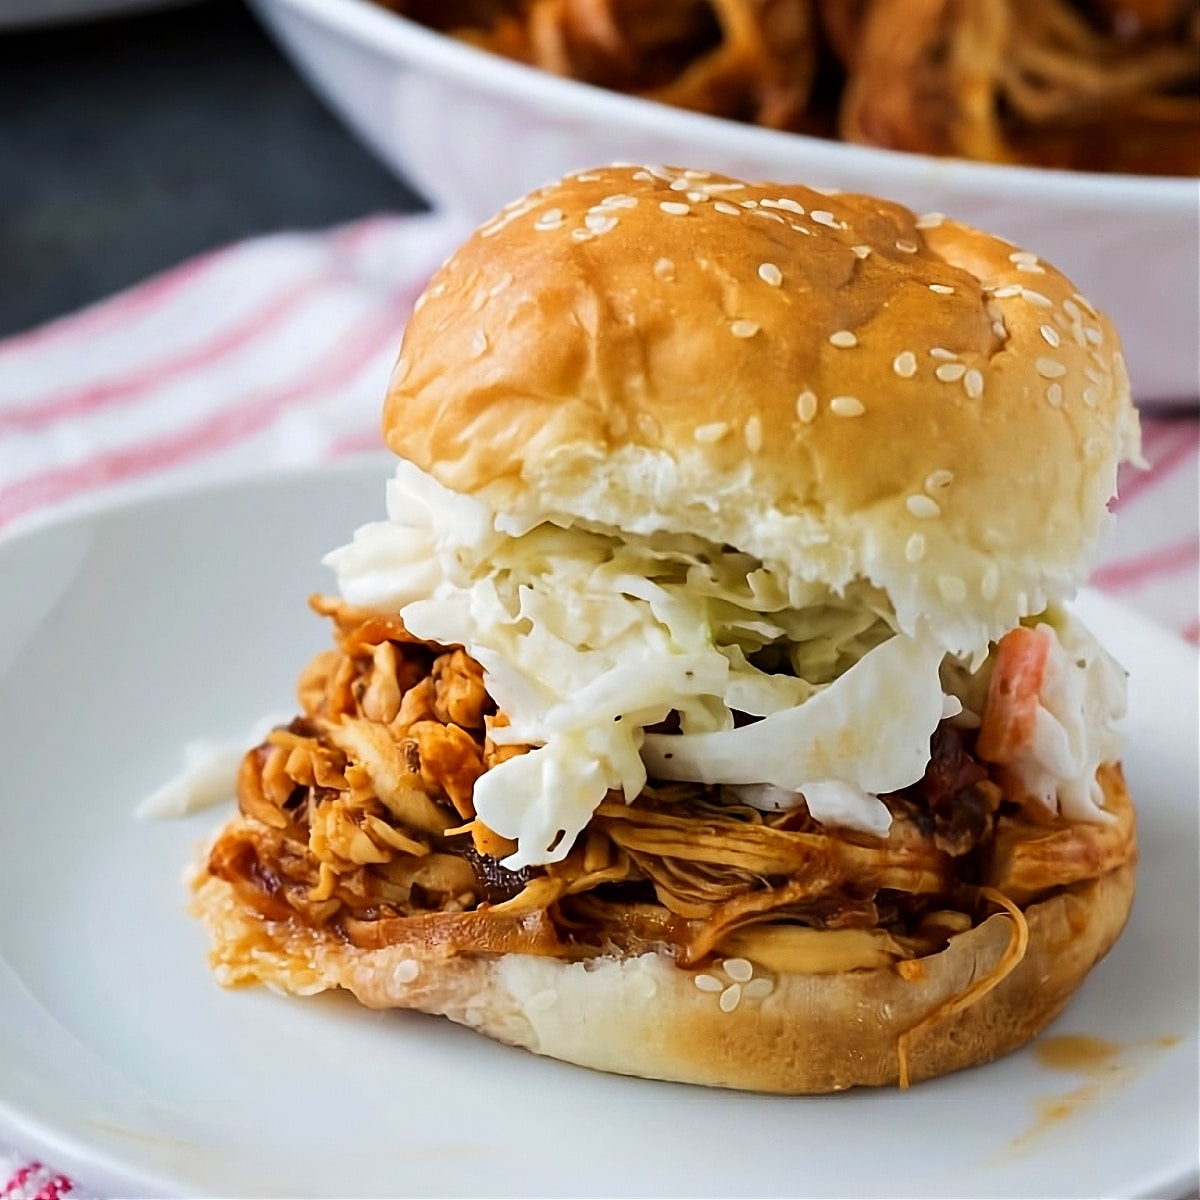 Chipotle Pulled Chicken with coleslaw on a bun.